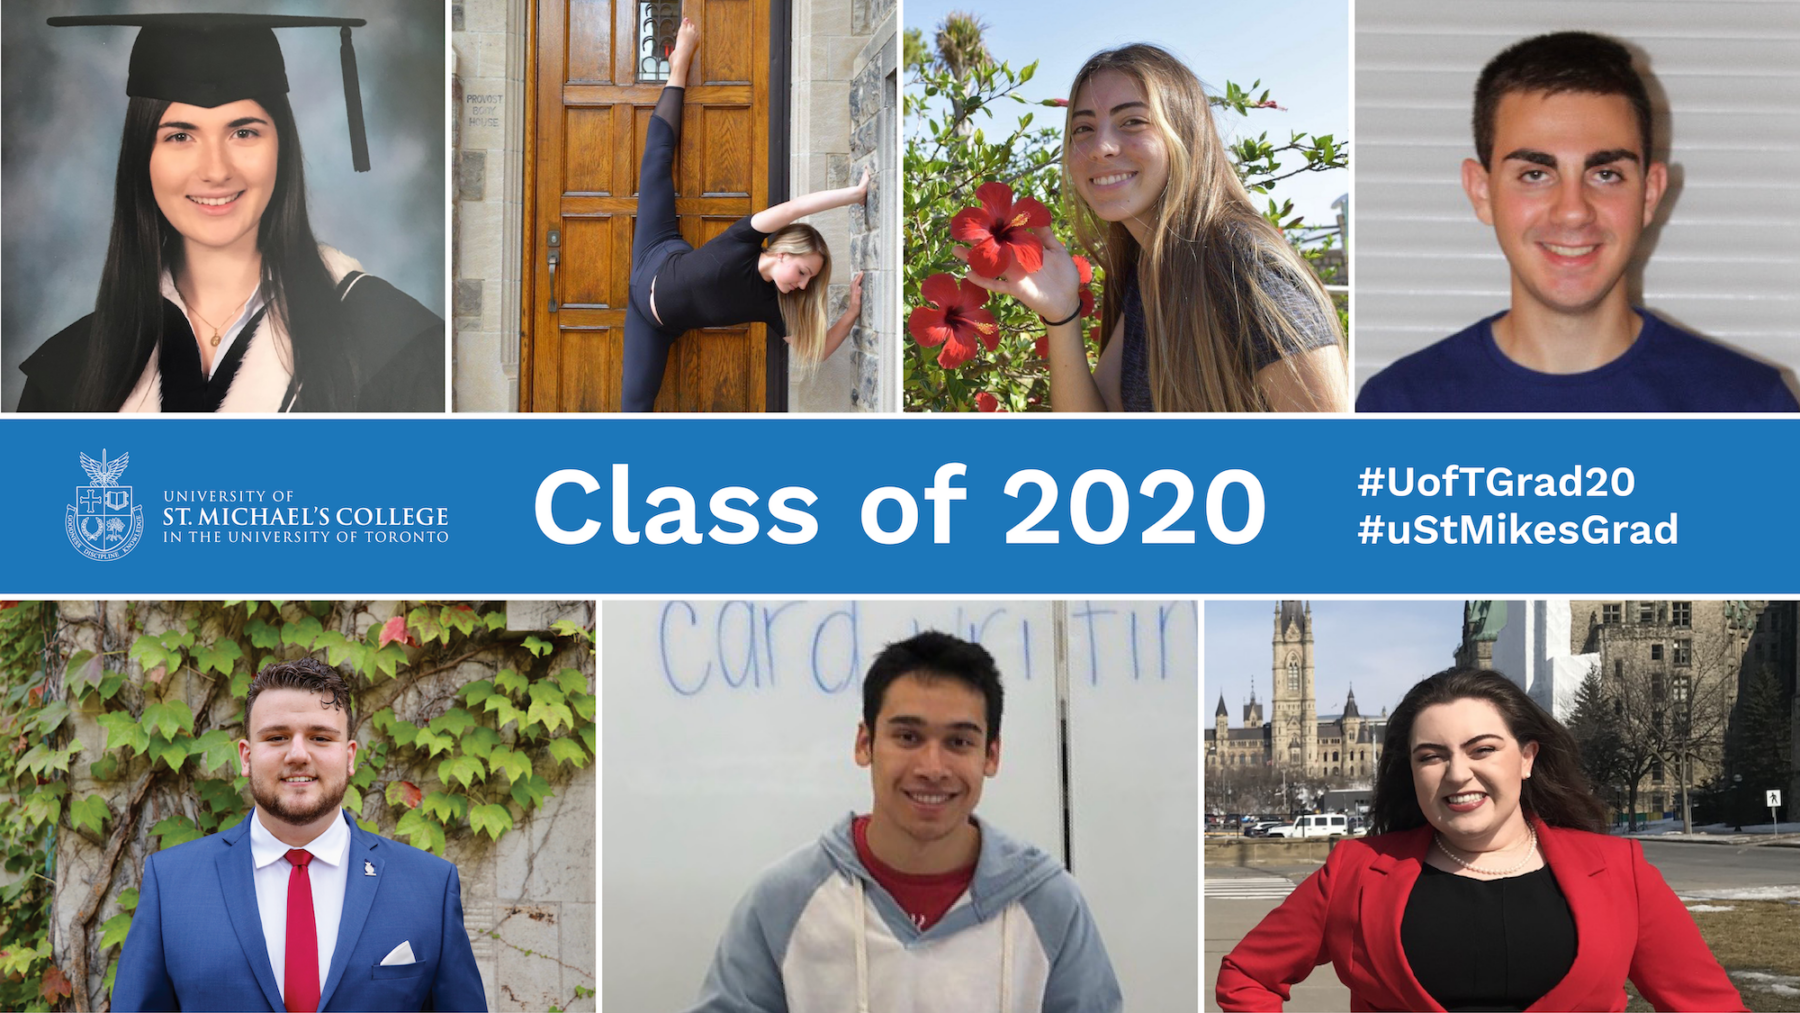 A decorative header for the story linked in the image caption about how the Class of 2020 will remember most about St. Michael's. 